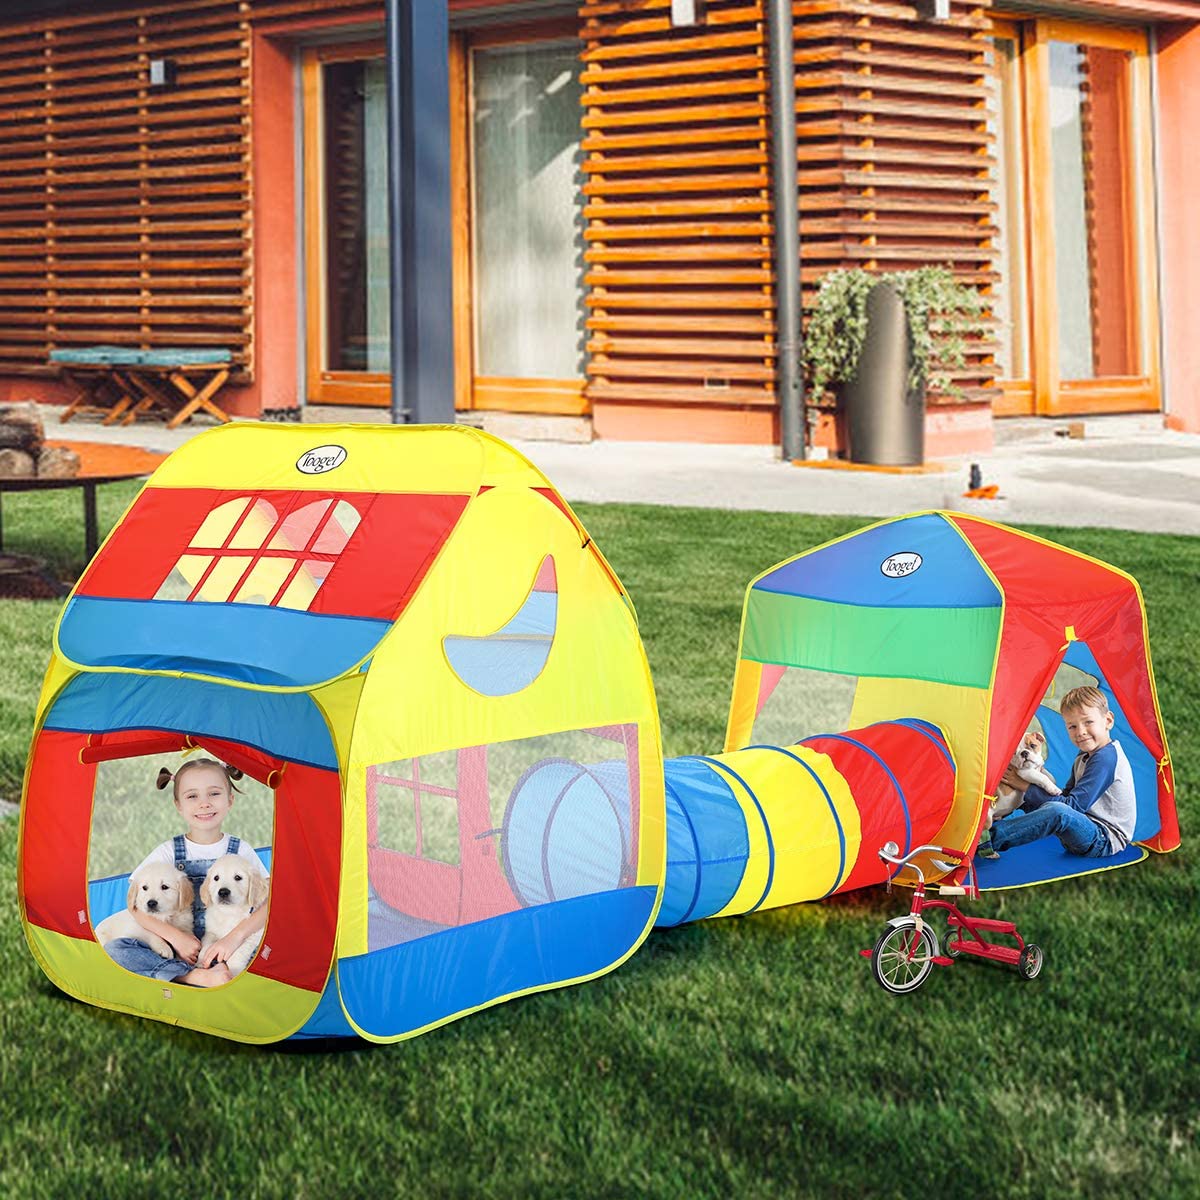 Toogle’s Playhouse Tents